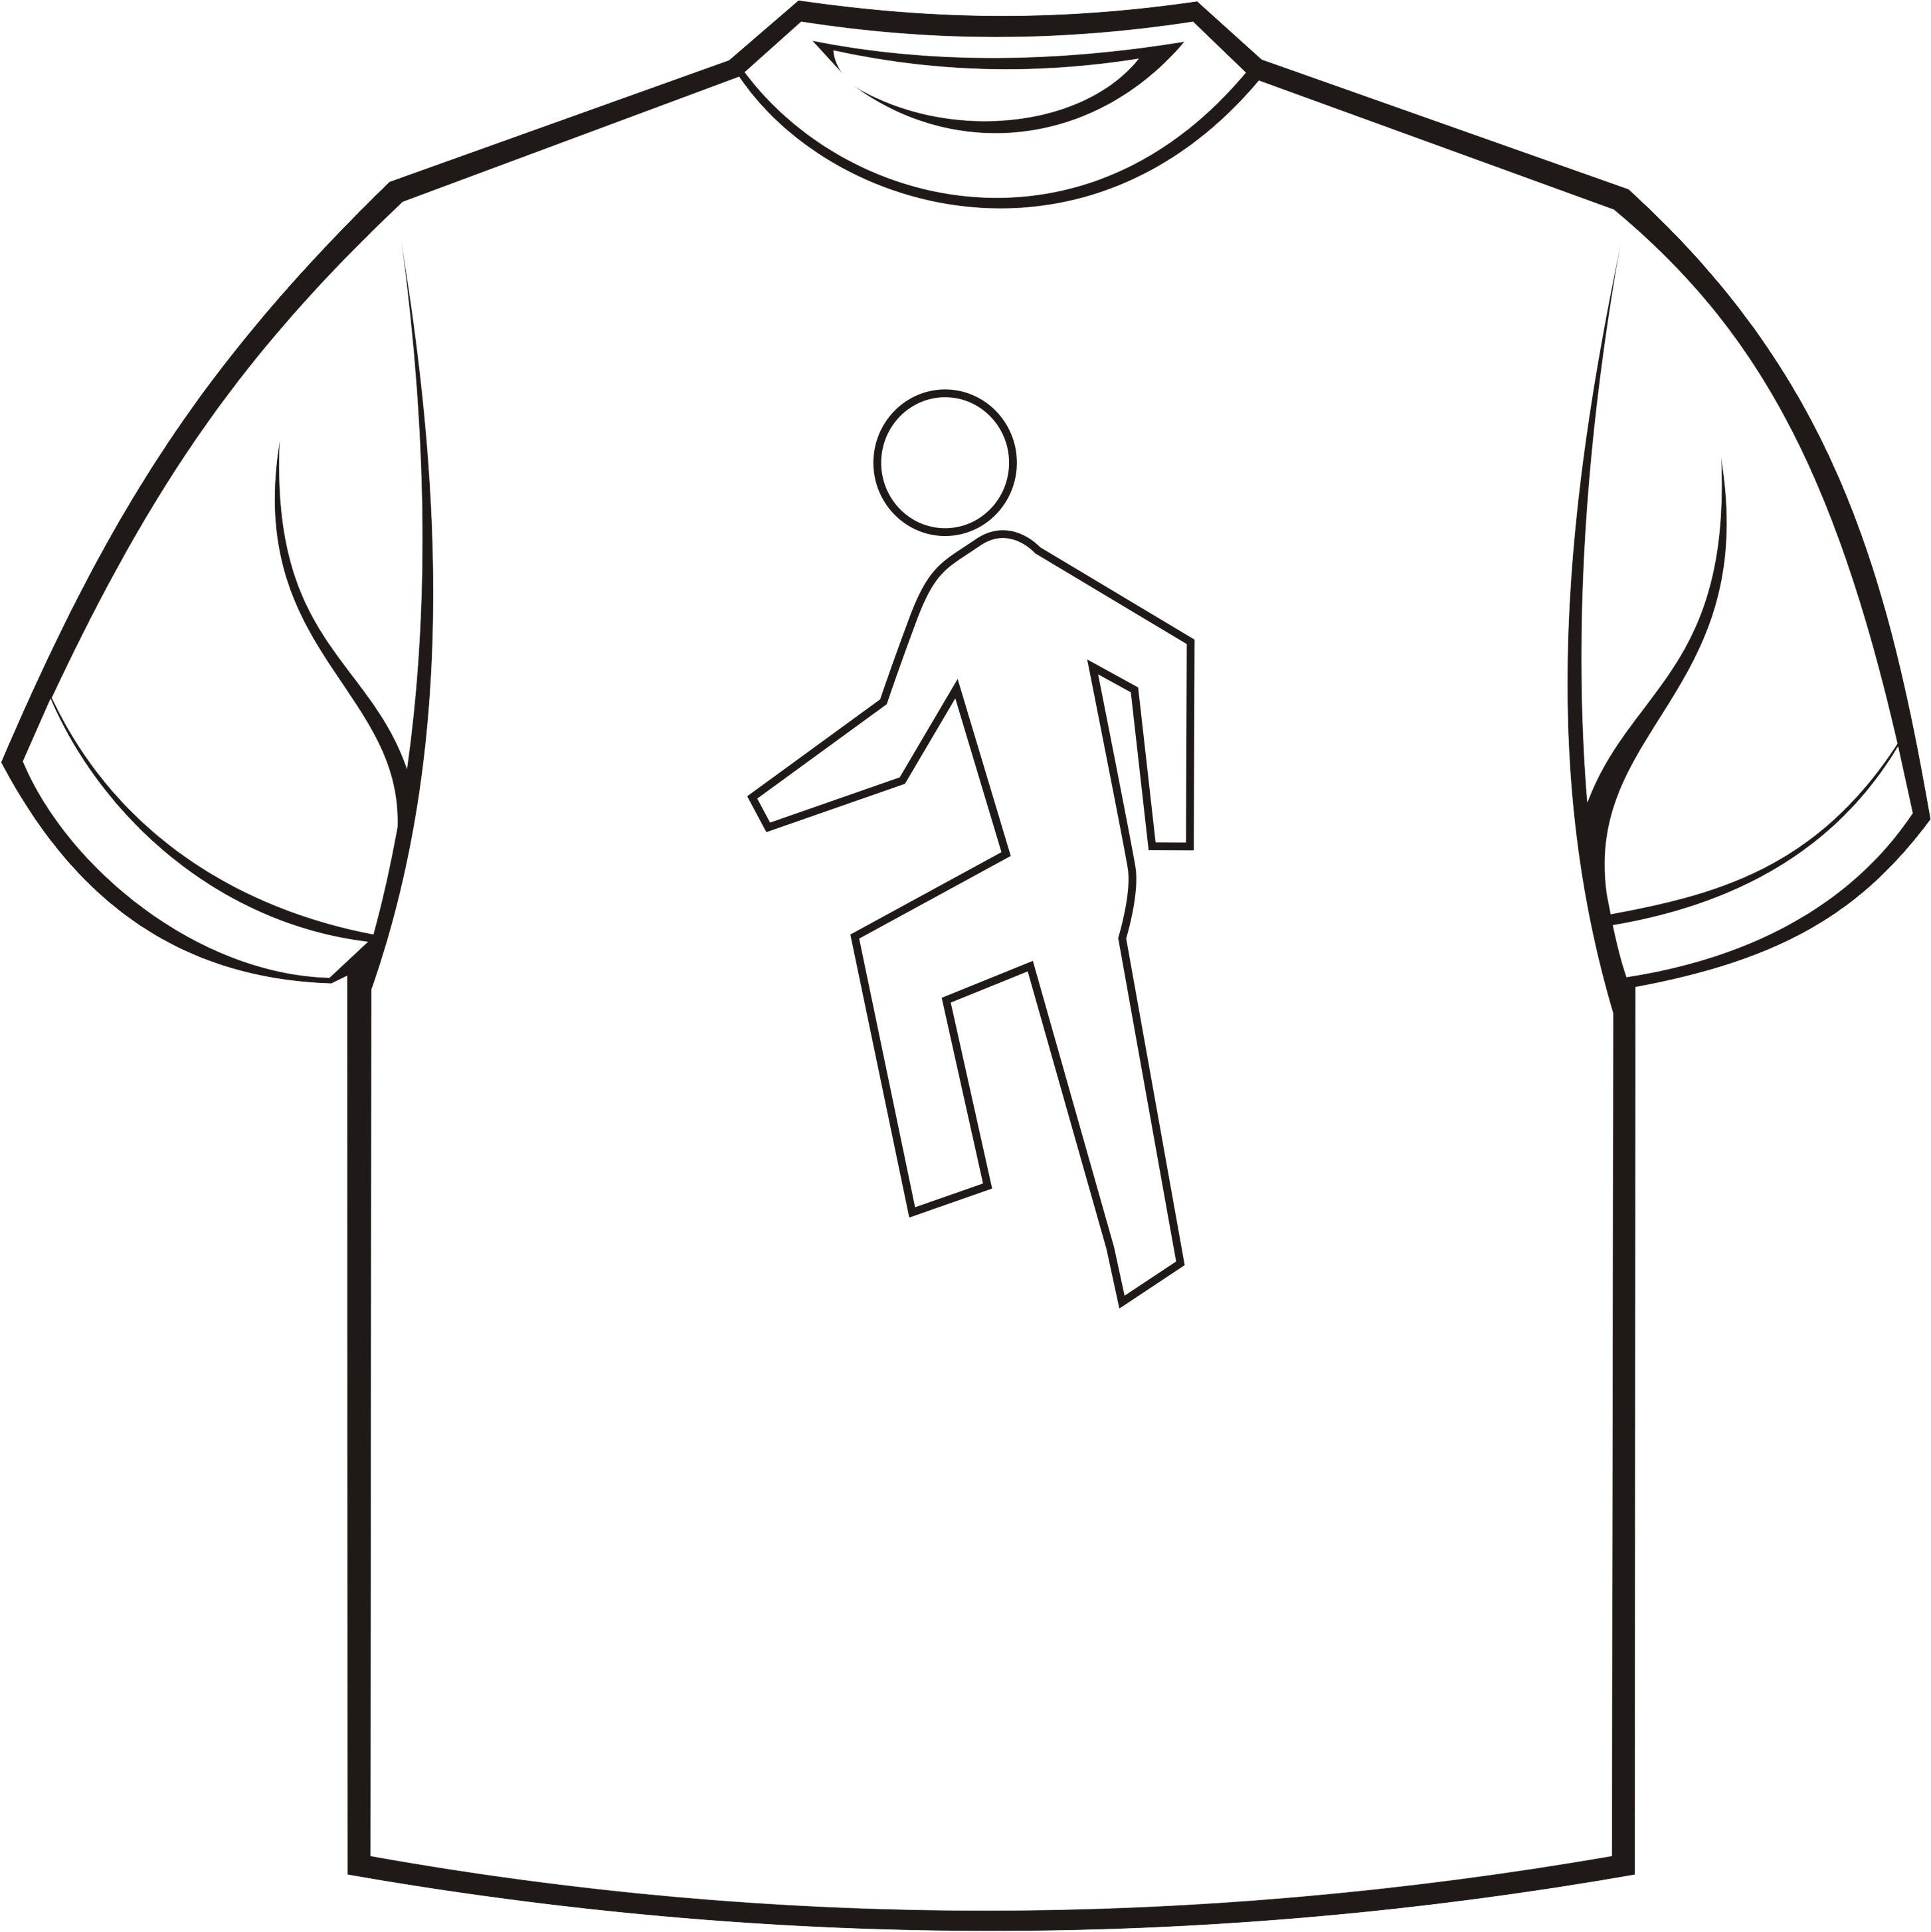 ... T Shirt Clipart Black And White - clipartall ...